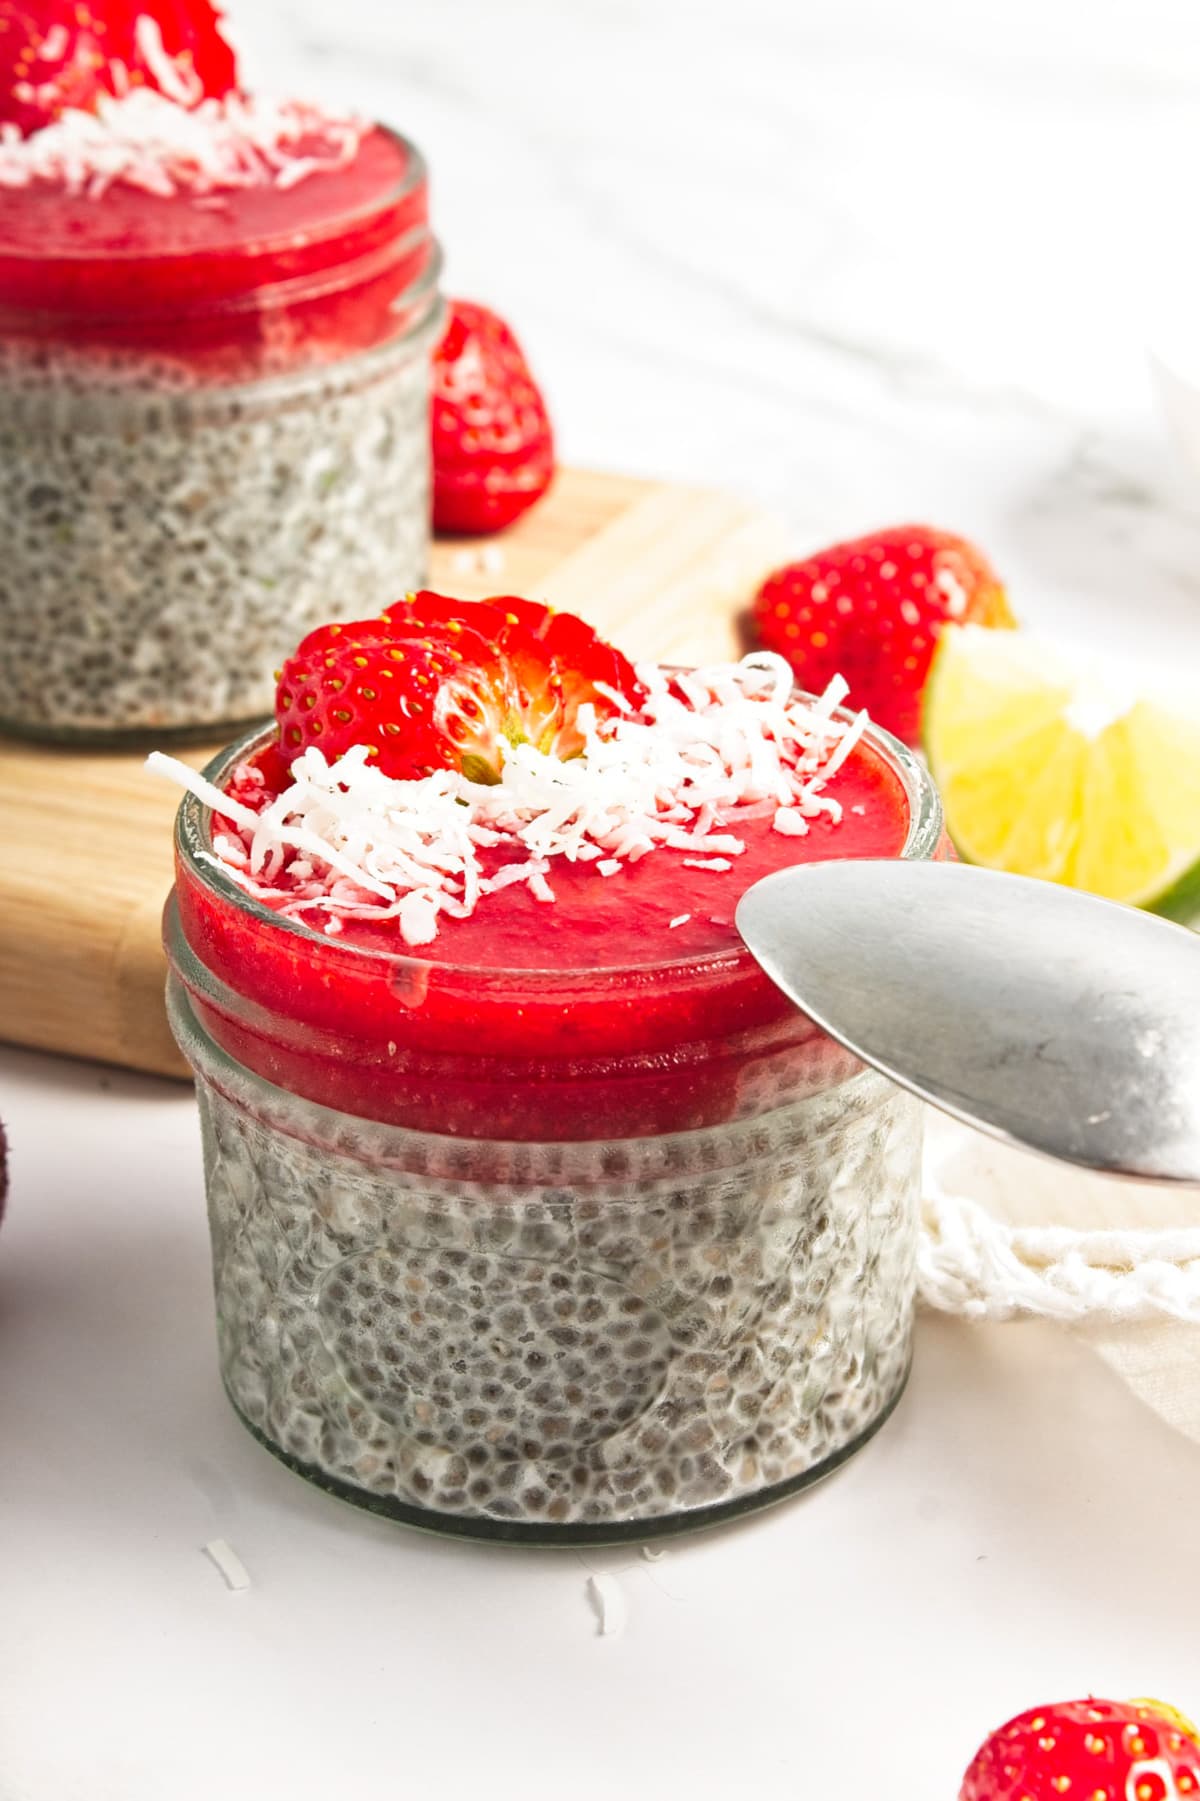 A spoon ready to dip into a chia pudding.